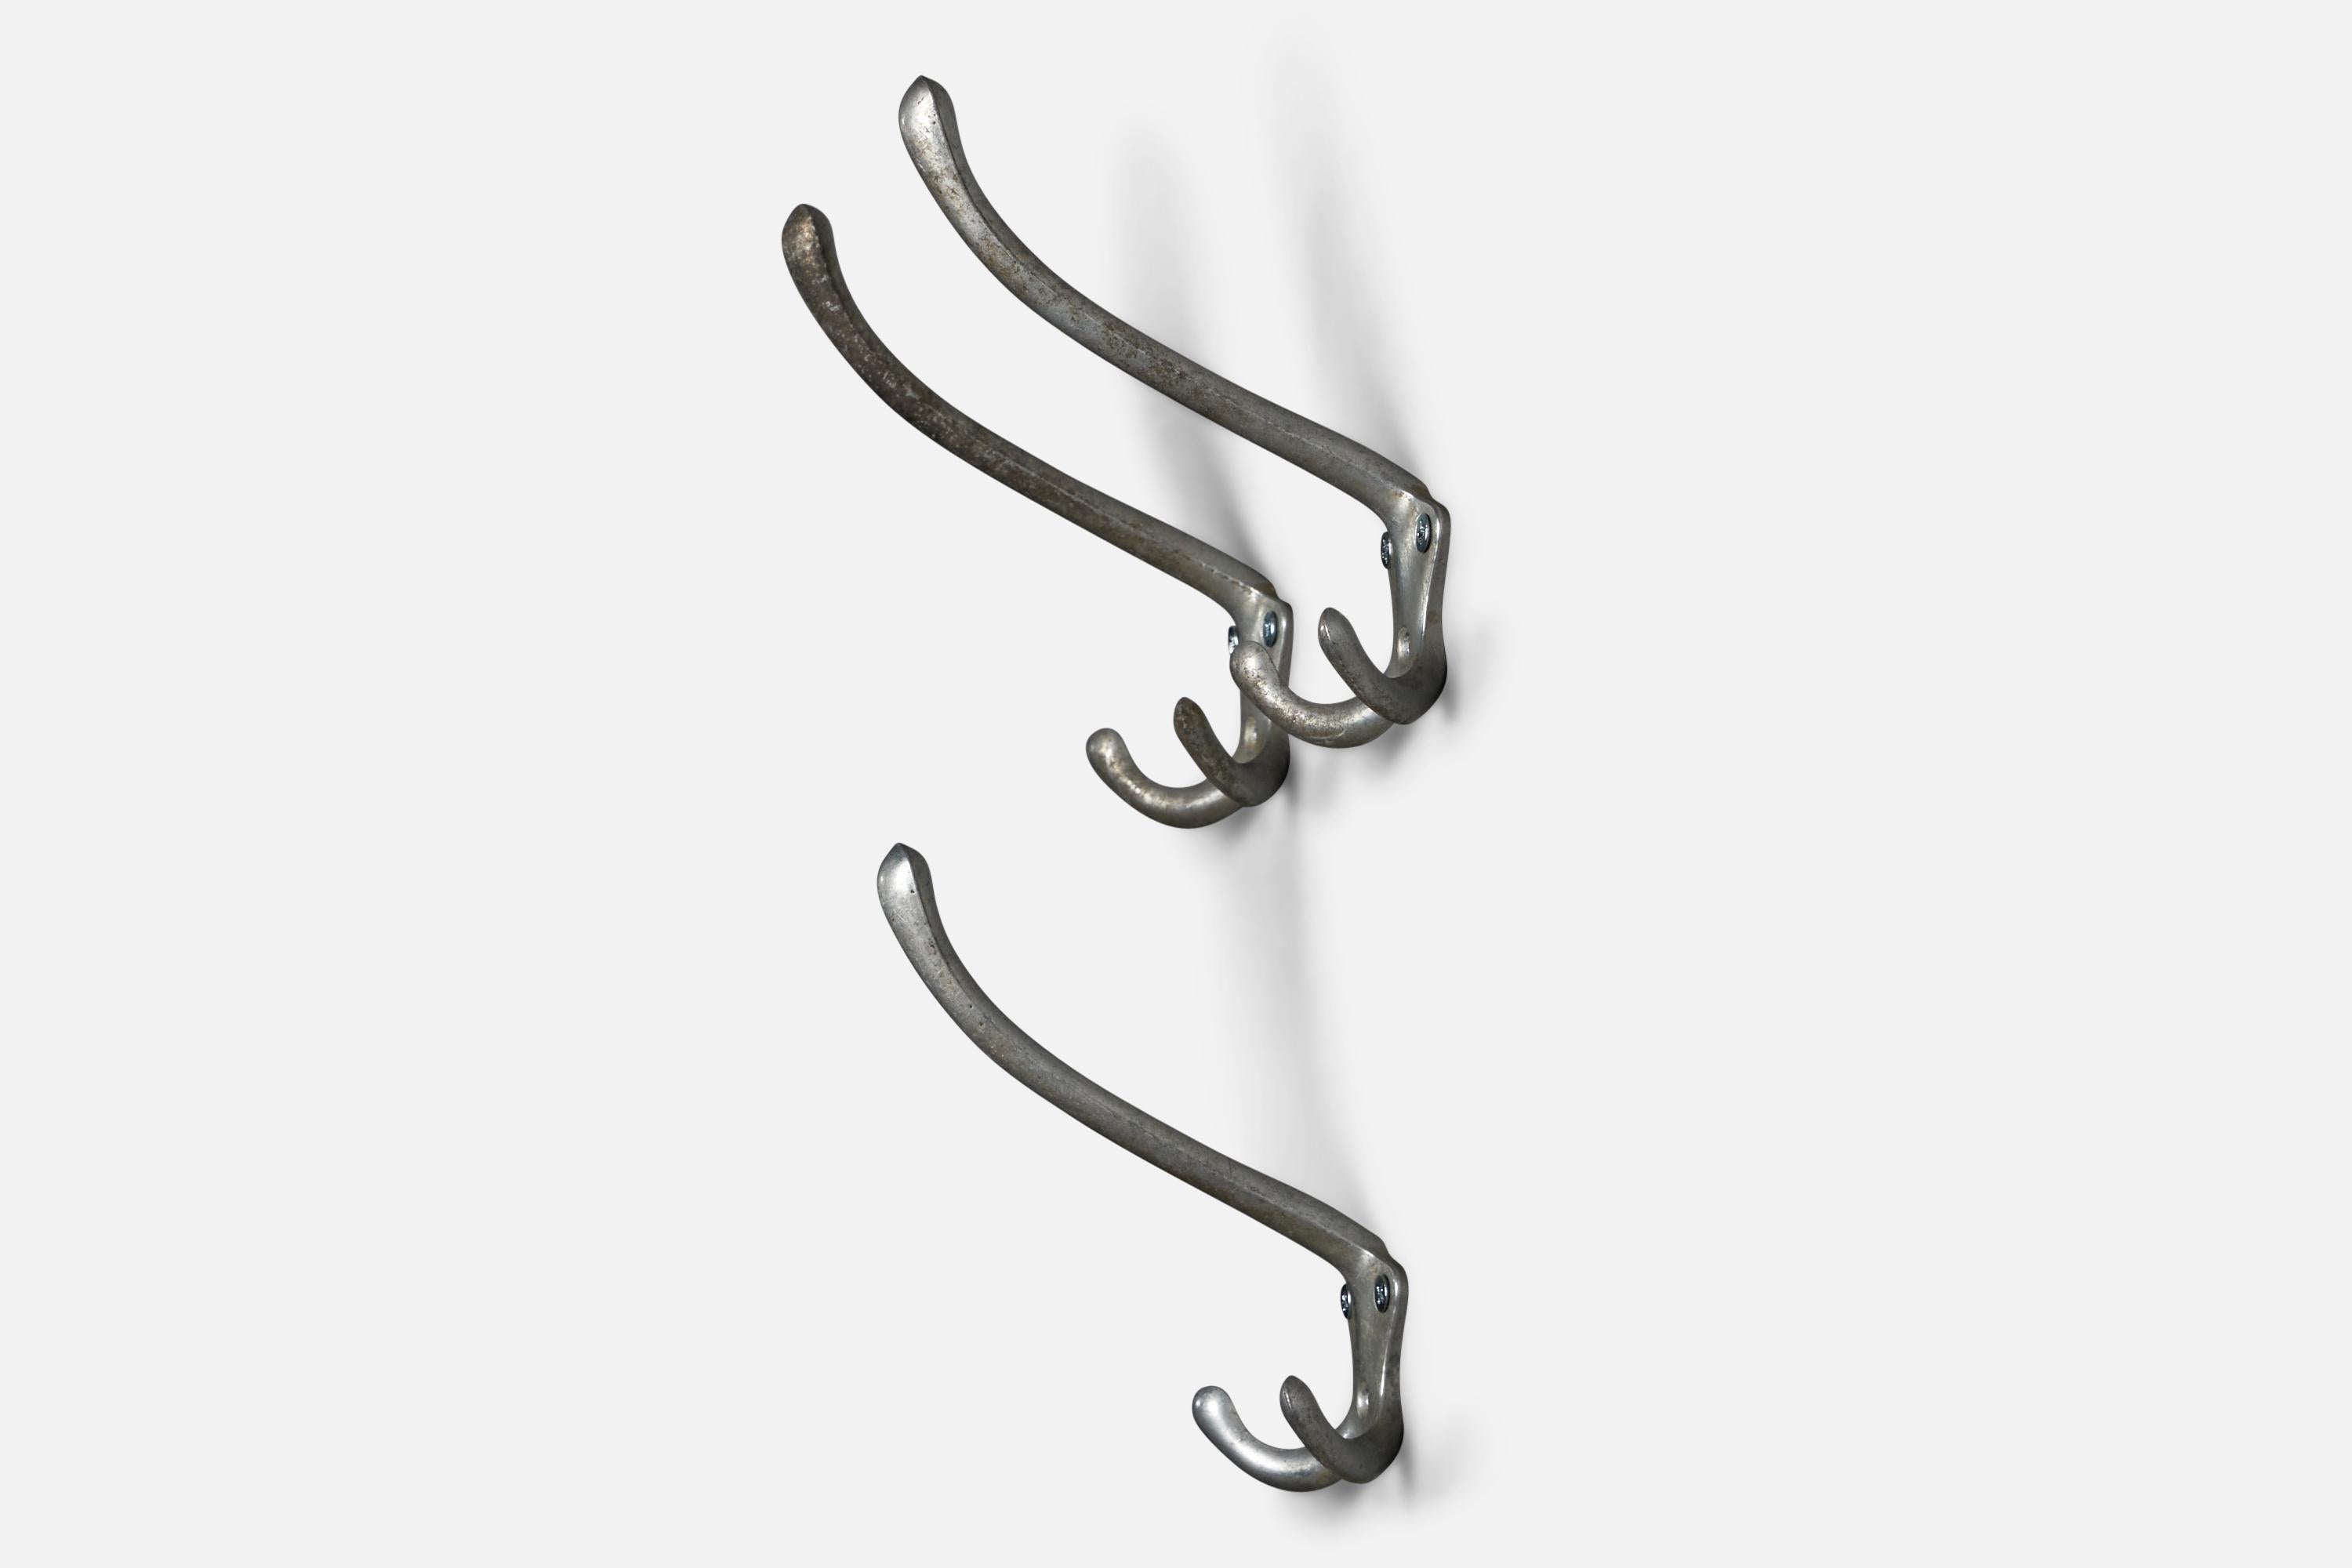 A set of three nickel coat hangers designed by Luigi Caccia Dominioni and produced by Azucena, Italy, 1950s.